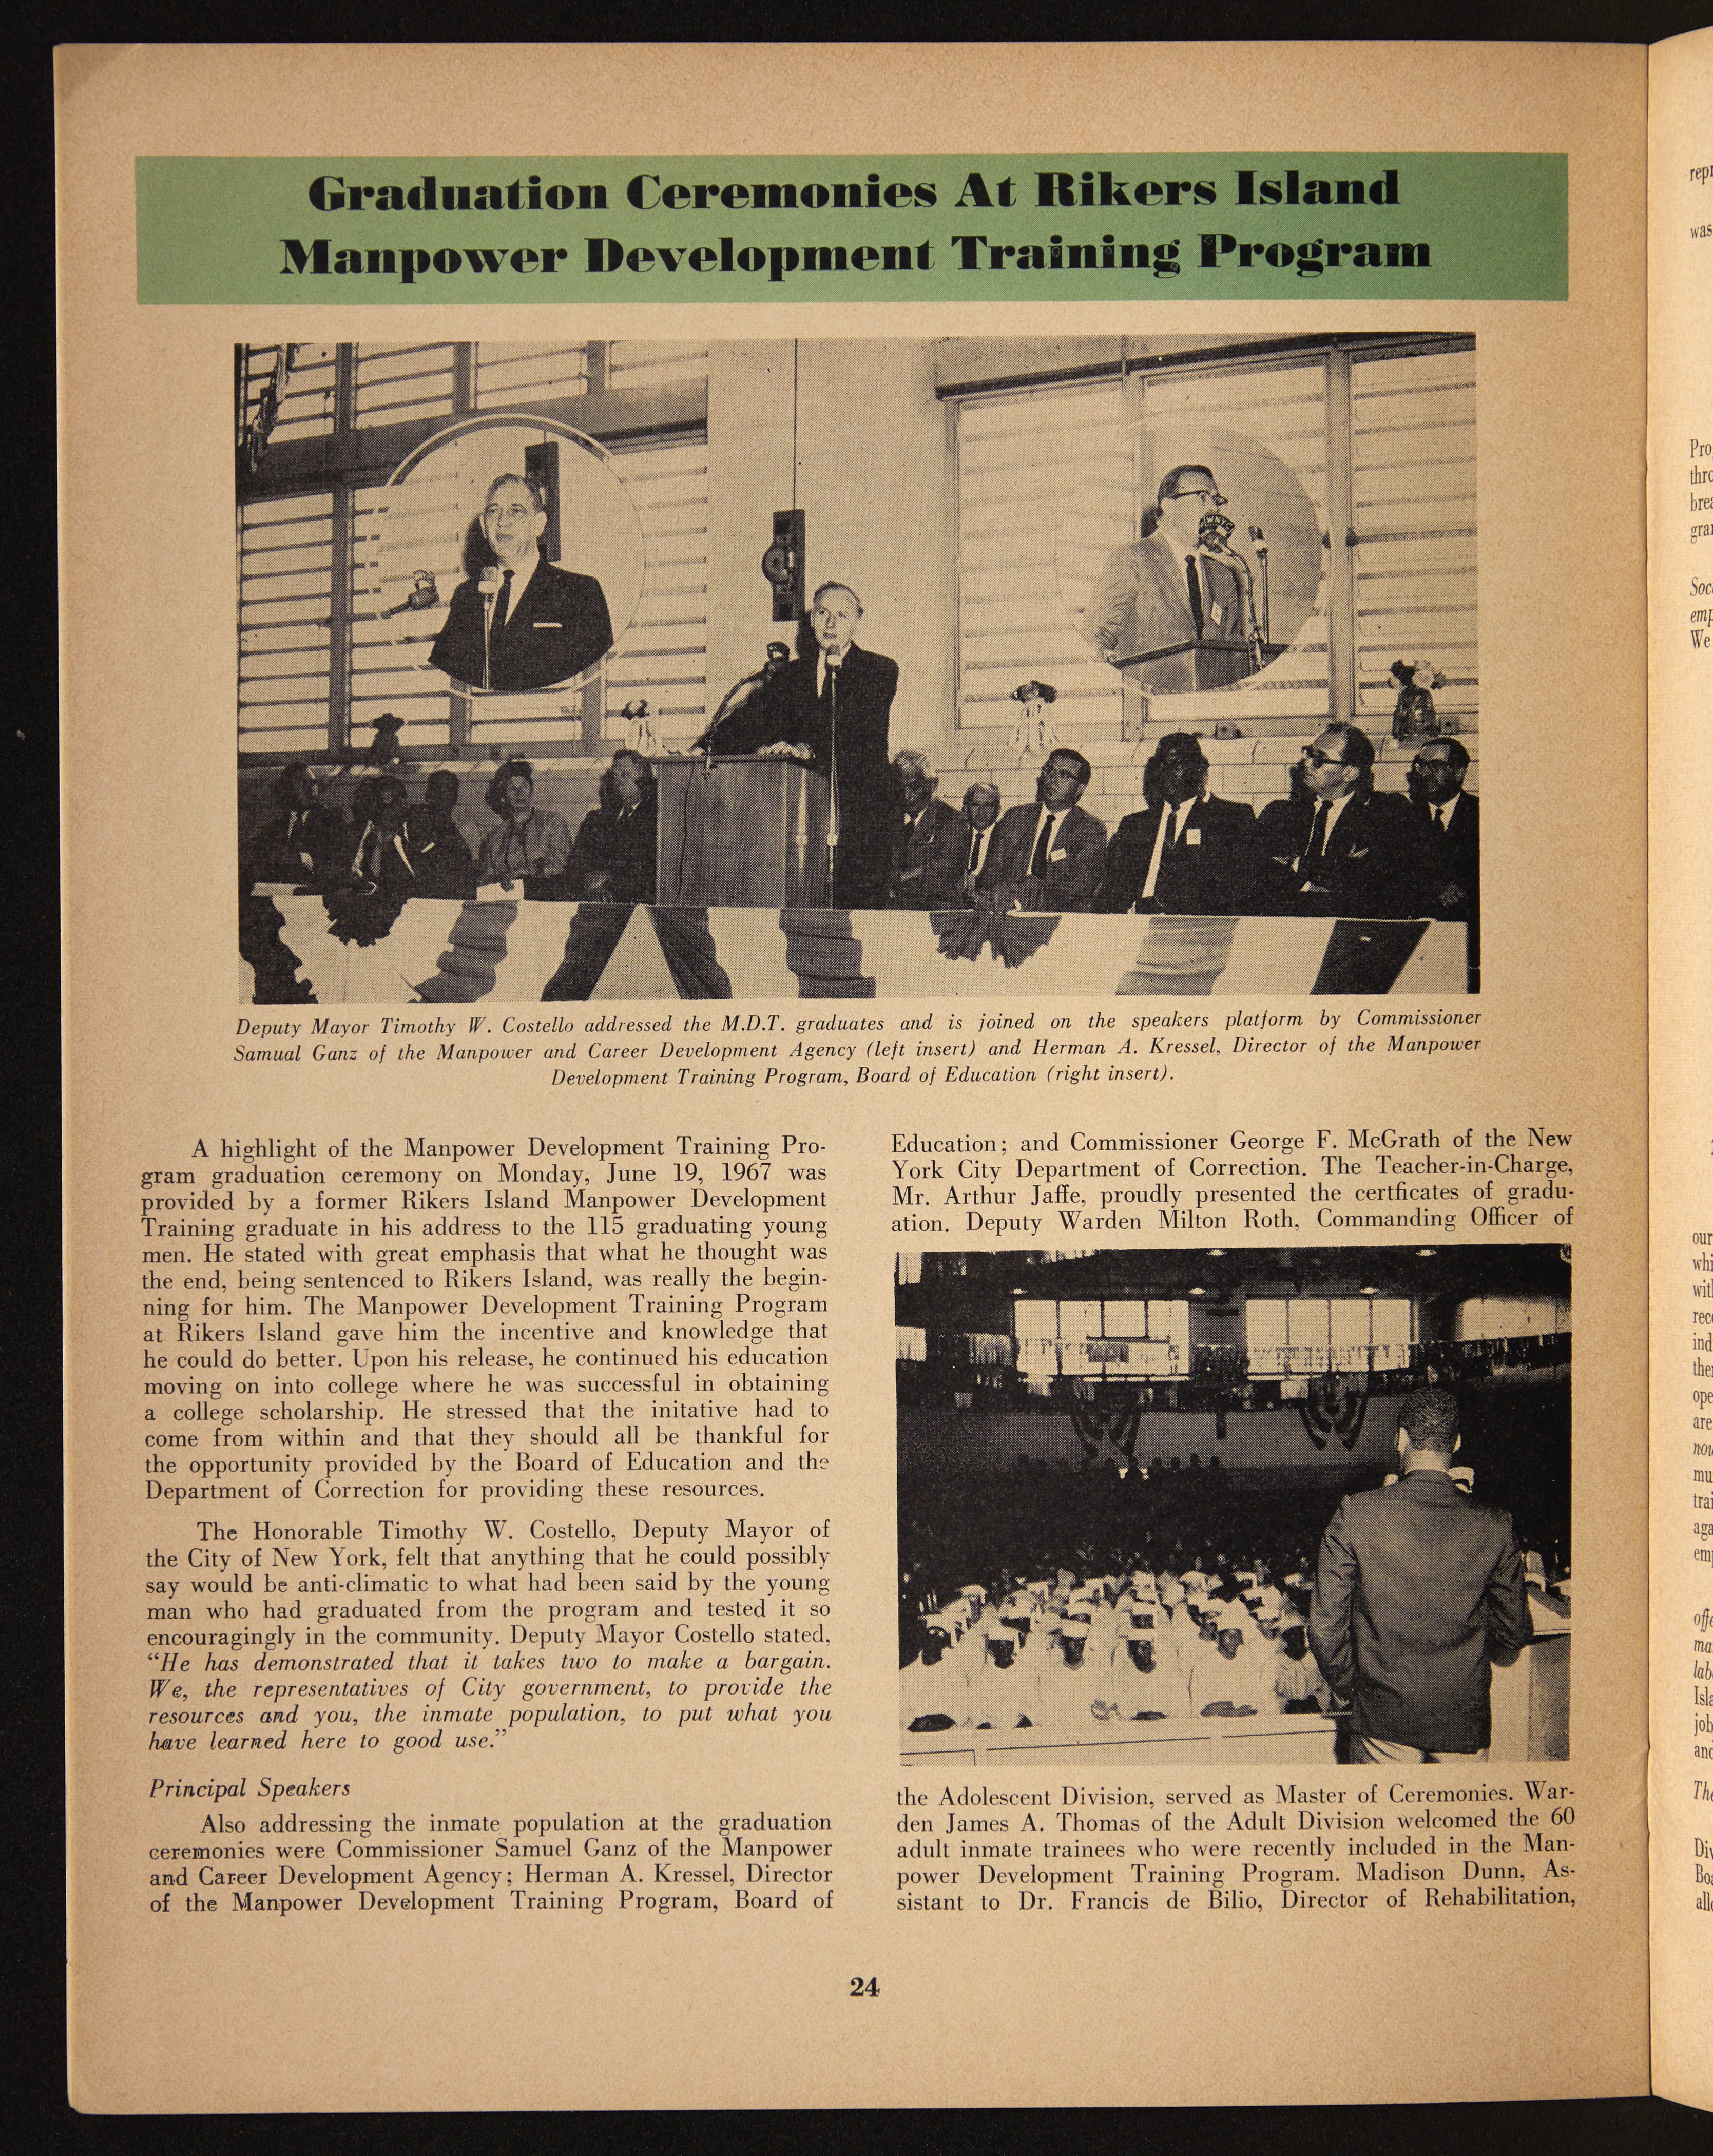 A page from a 1967 newsletter showing the Deputy Mayor Timothy Connolly speaking at graduation ceremony amongst several men.